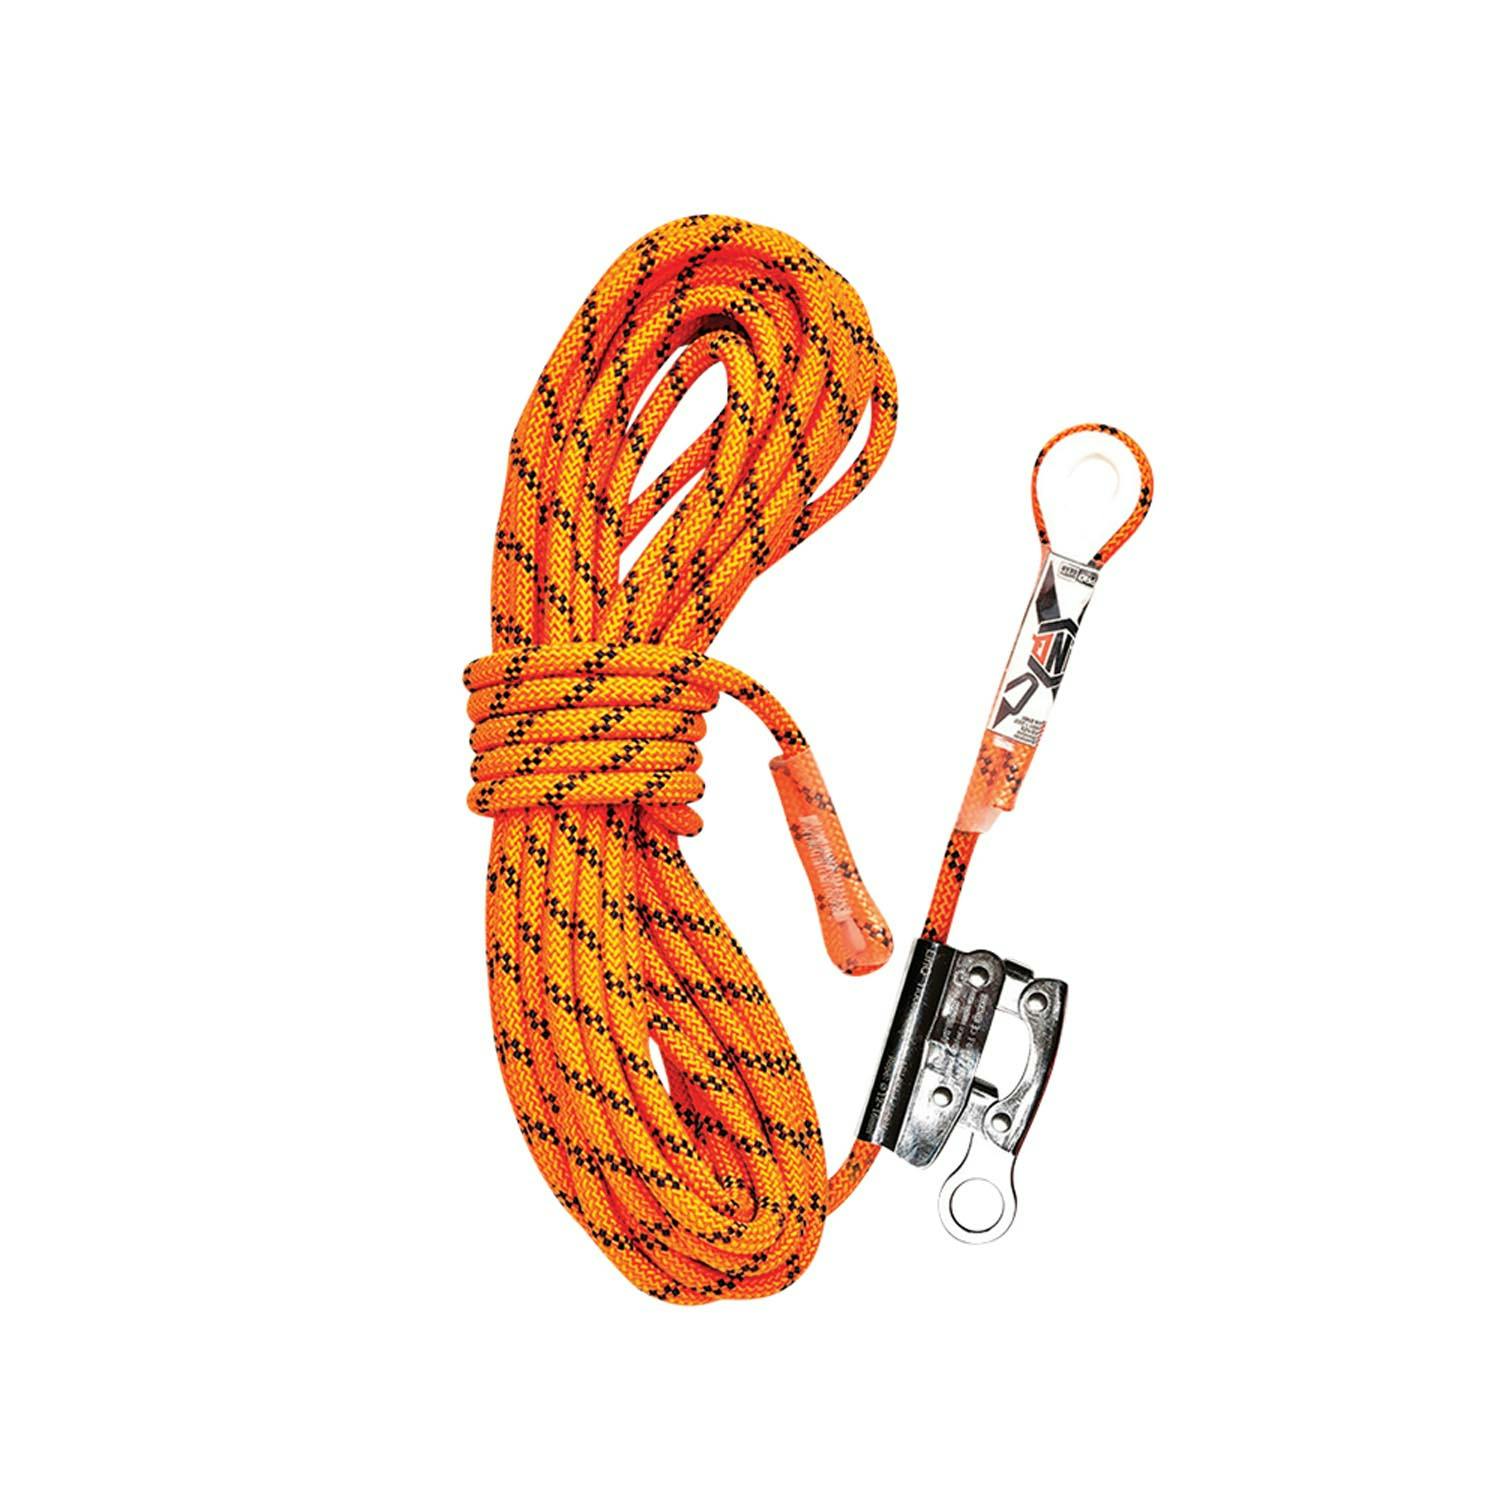 LINQ Kernmantle Rope With Thimble Eye & Rope Grab_7